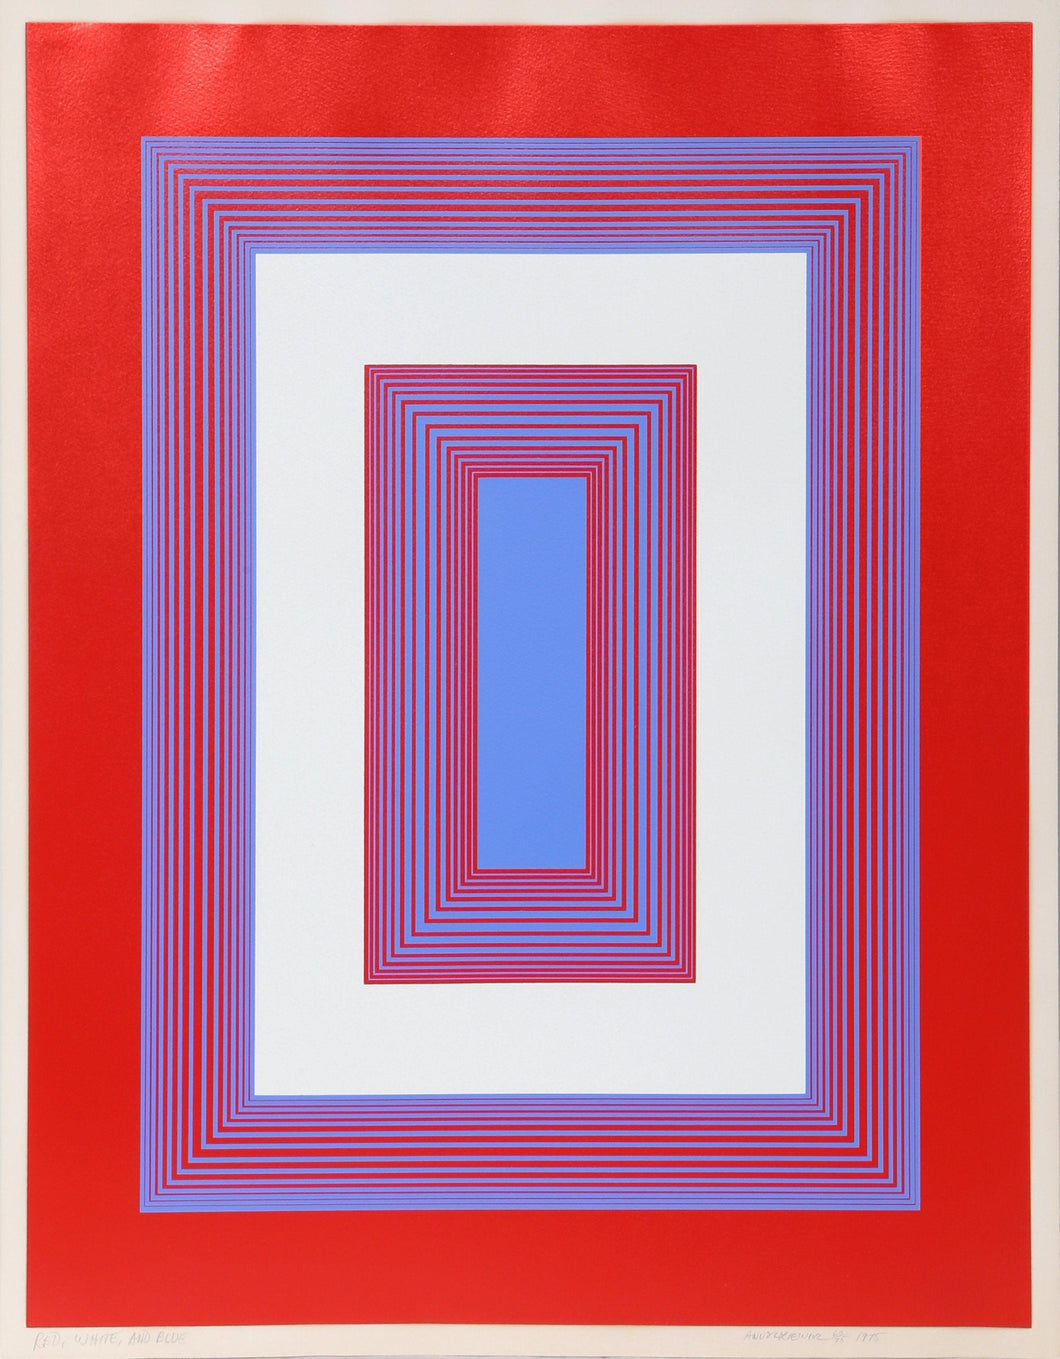 Red, White, and Blue, from 1776 USA Screenprint | Richard Anuszkiewicz,{{product.type}}